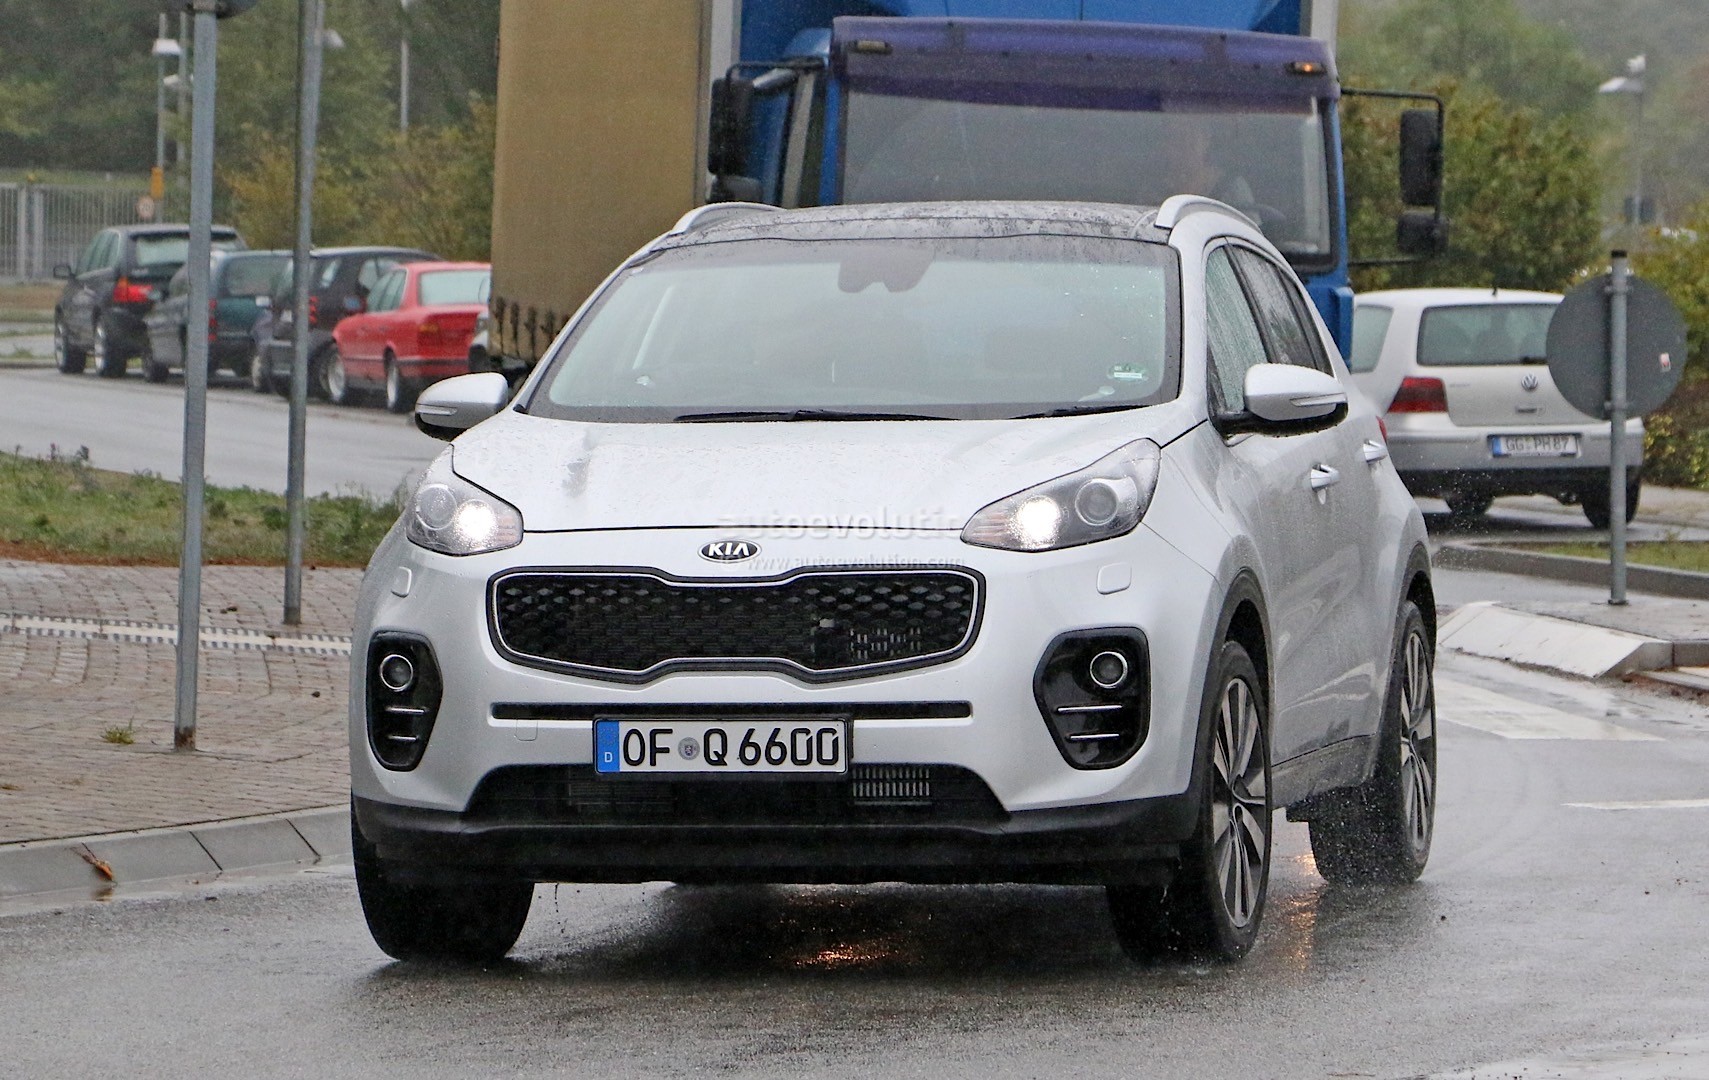 2016-kia-sportage-spotted-camouflage-free-looks-even-better-in-real-life-photo-gallery_1.jpg